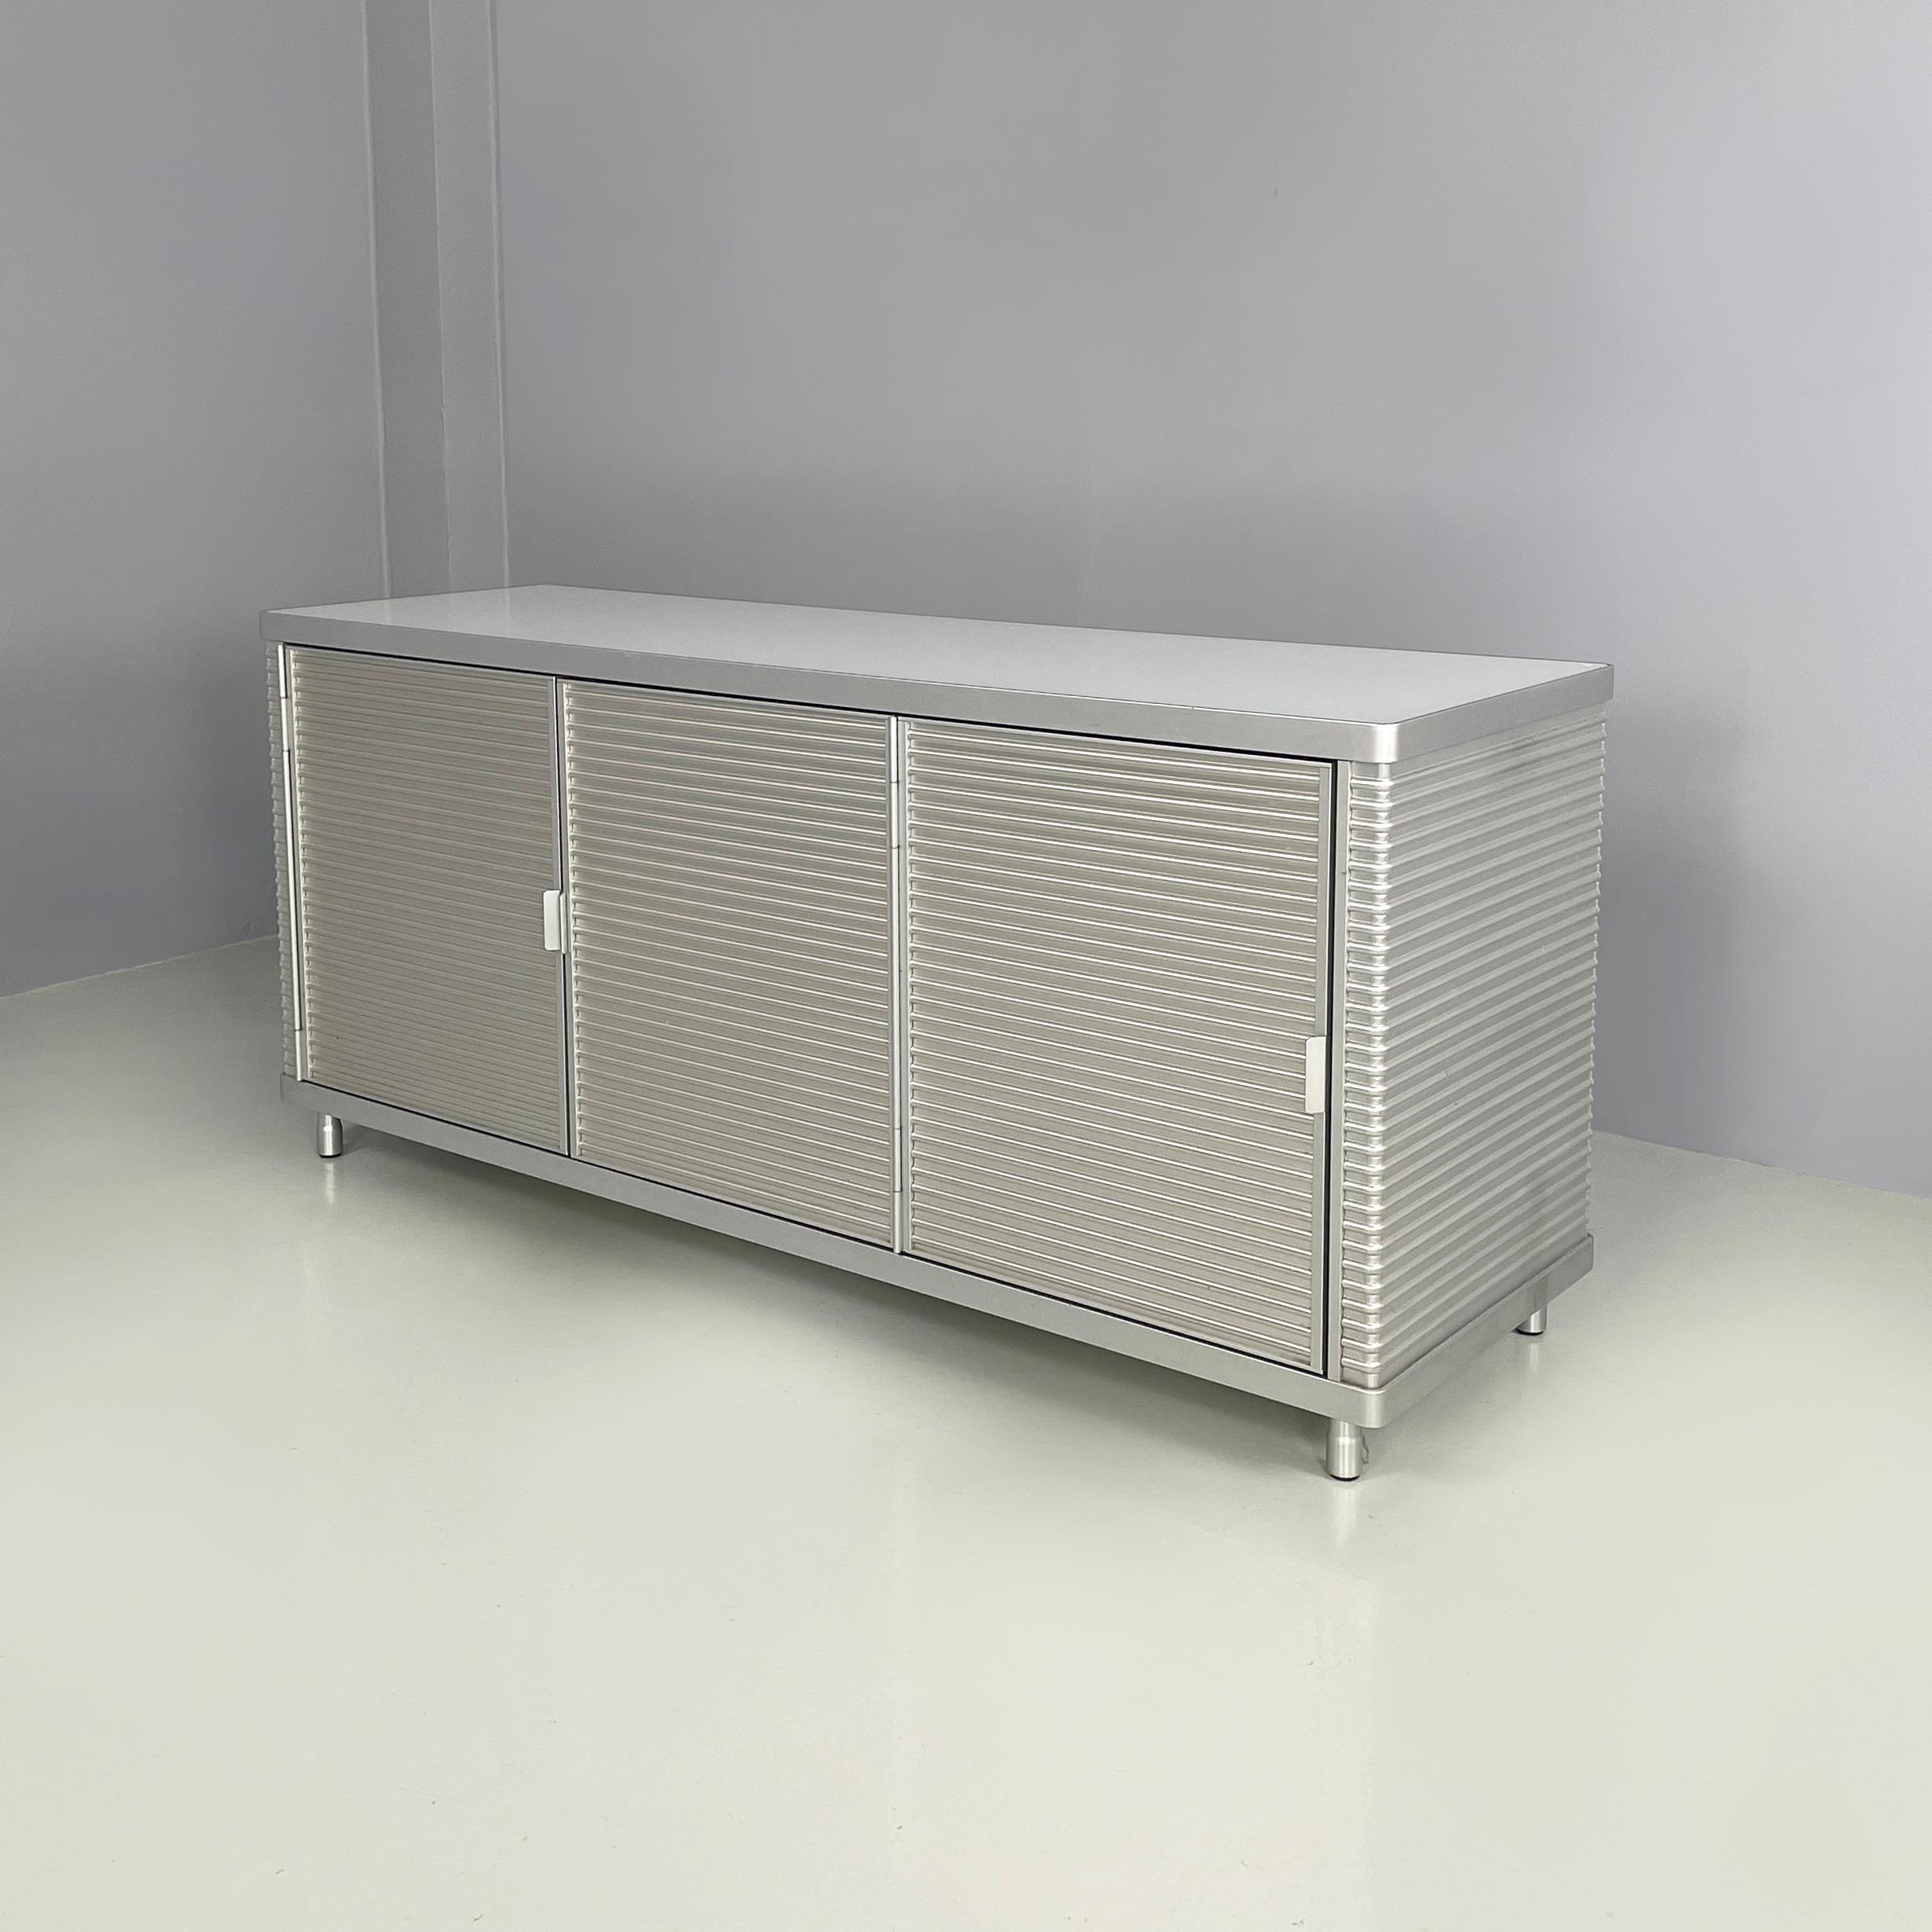 Italian industrial modern Aluminum and glass sideboard  by Ycami, 1990s
Sideboard with rectangular base and rounded corners, in aluminum and glass. The top is made of glass, while the structure is made of aluminum with a horizontally knurled